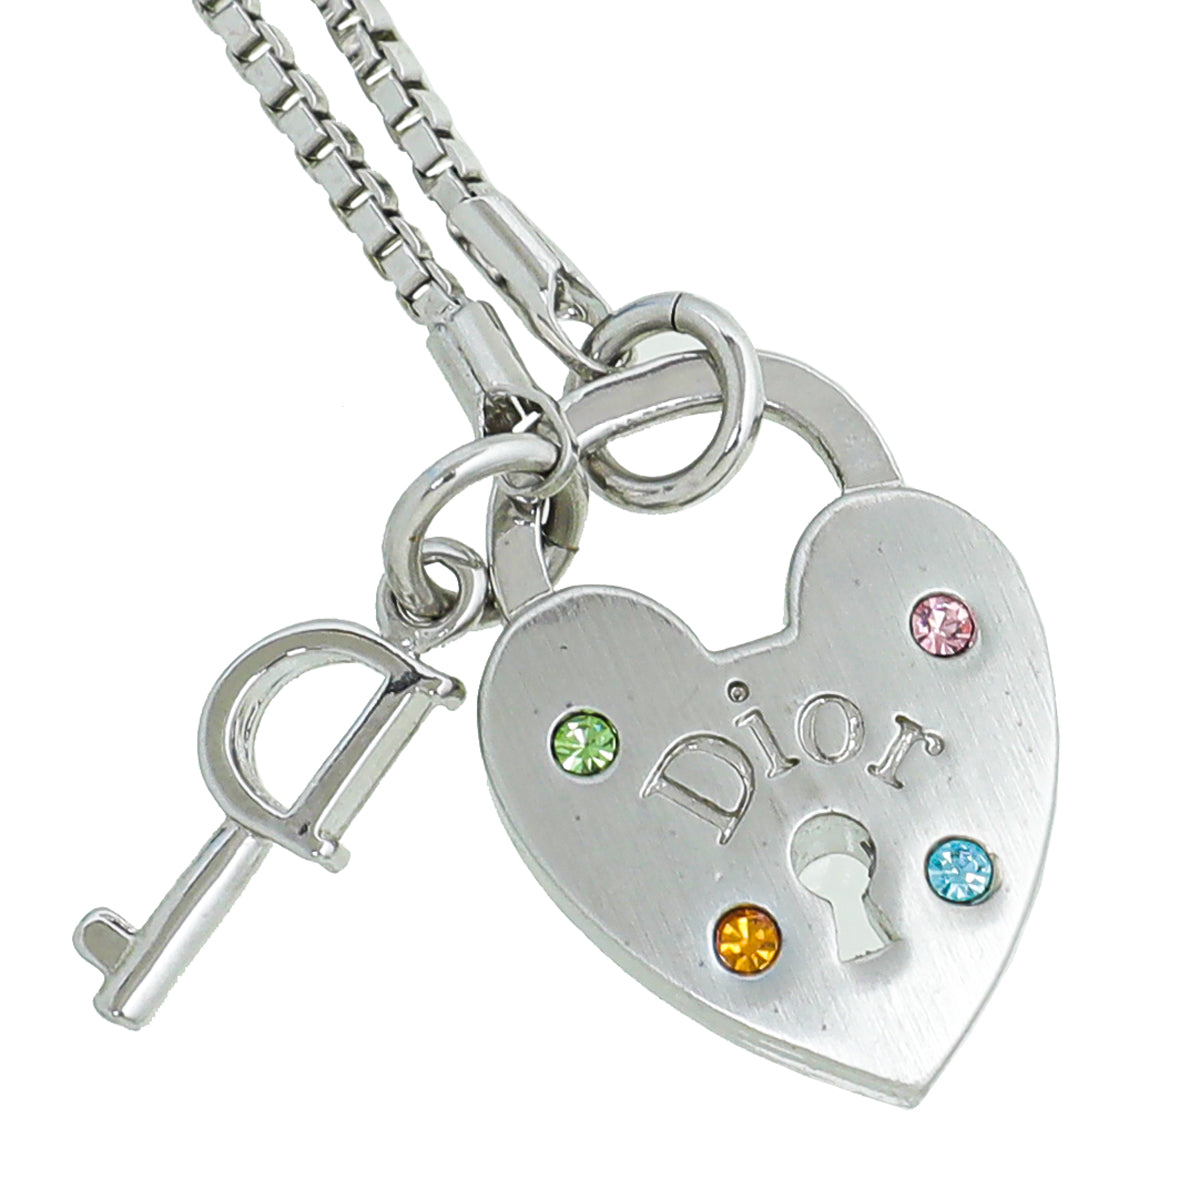 Christian Dior Silver Heart Lock And Key Crystal Necklace